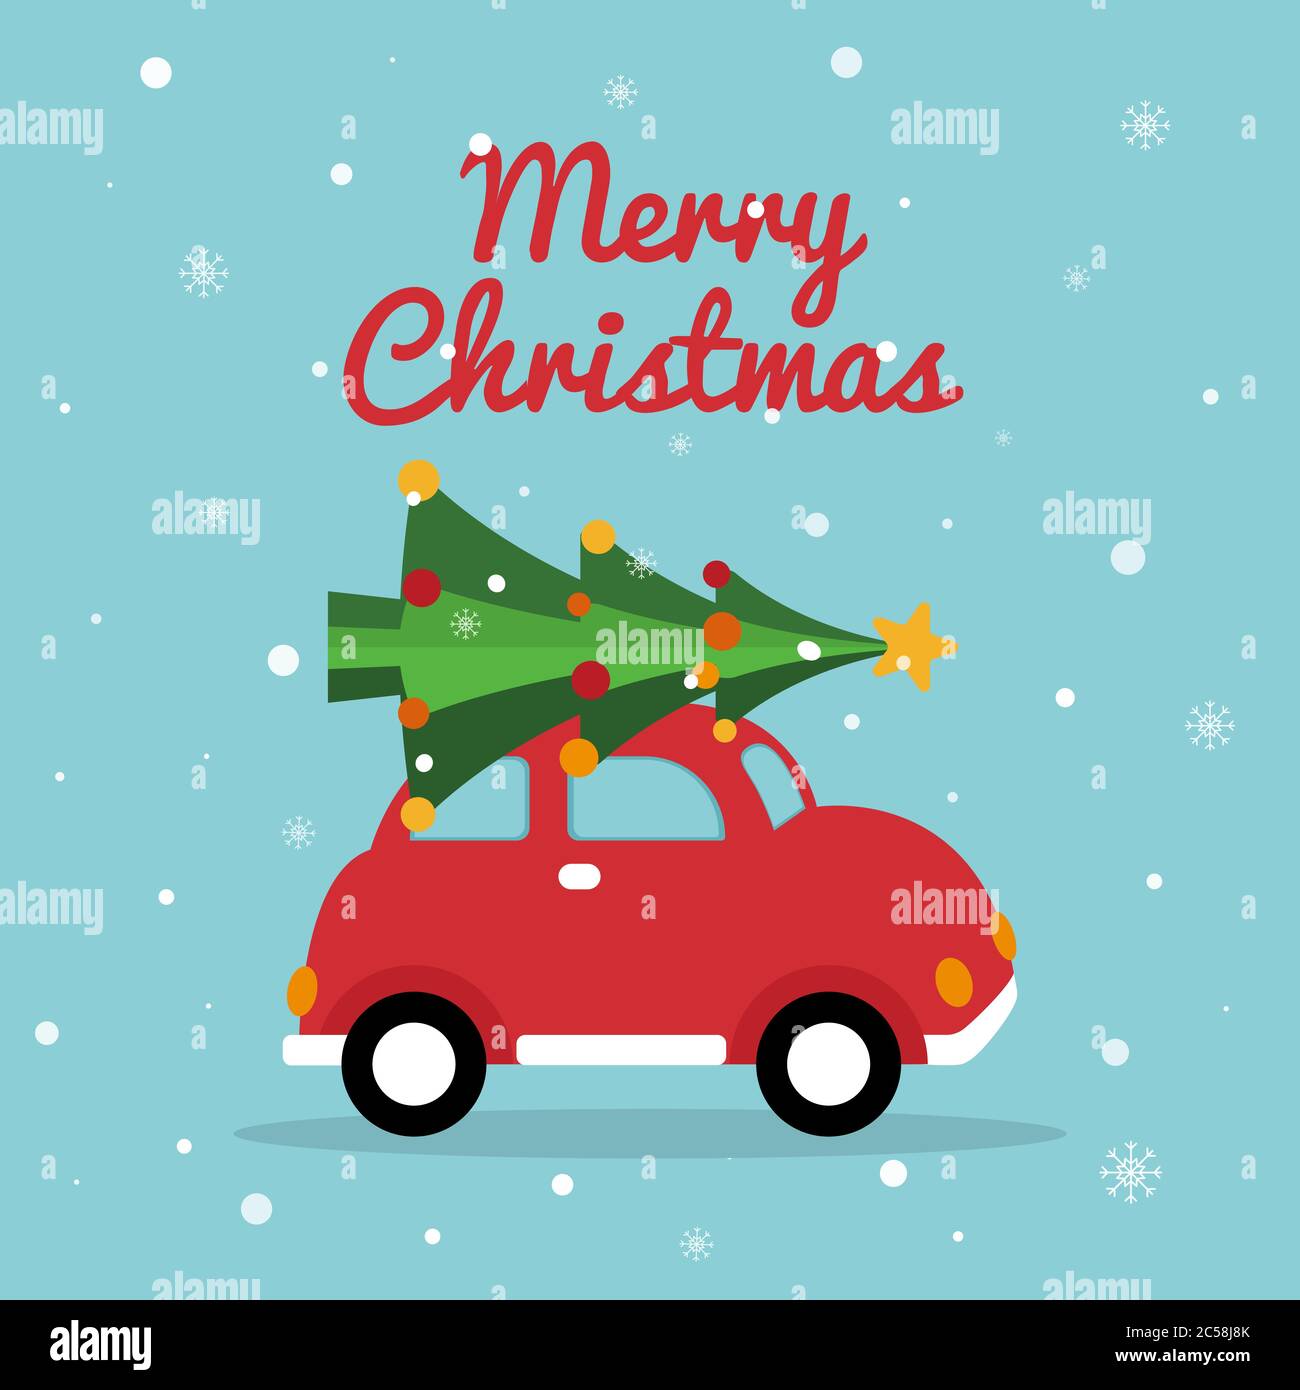 Christmas retro car. Merry Christmas card with red car, bright xmas tree, snowflakes. Winter holiday design. Vector illustration. Stock Vector